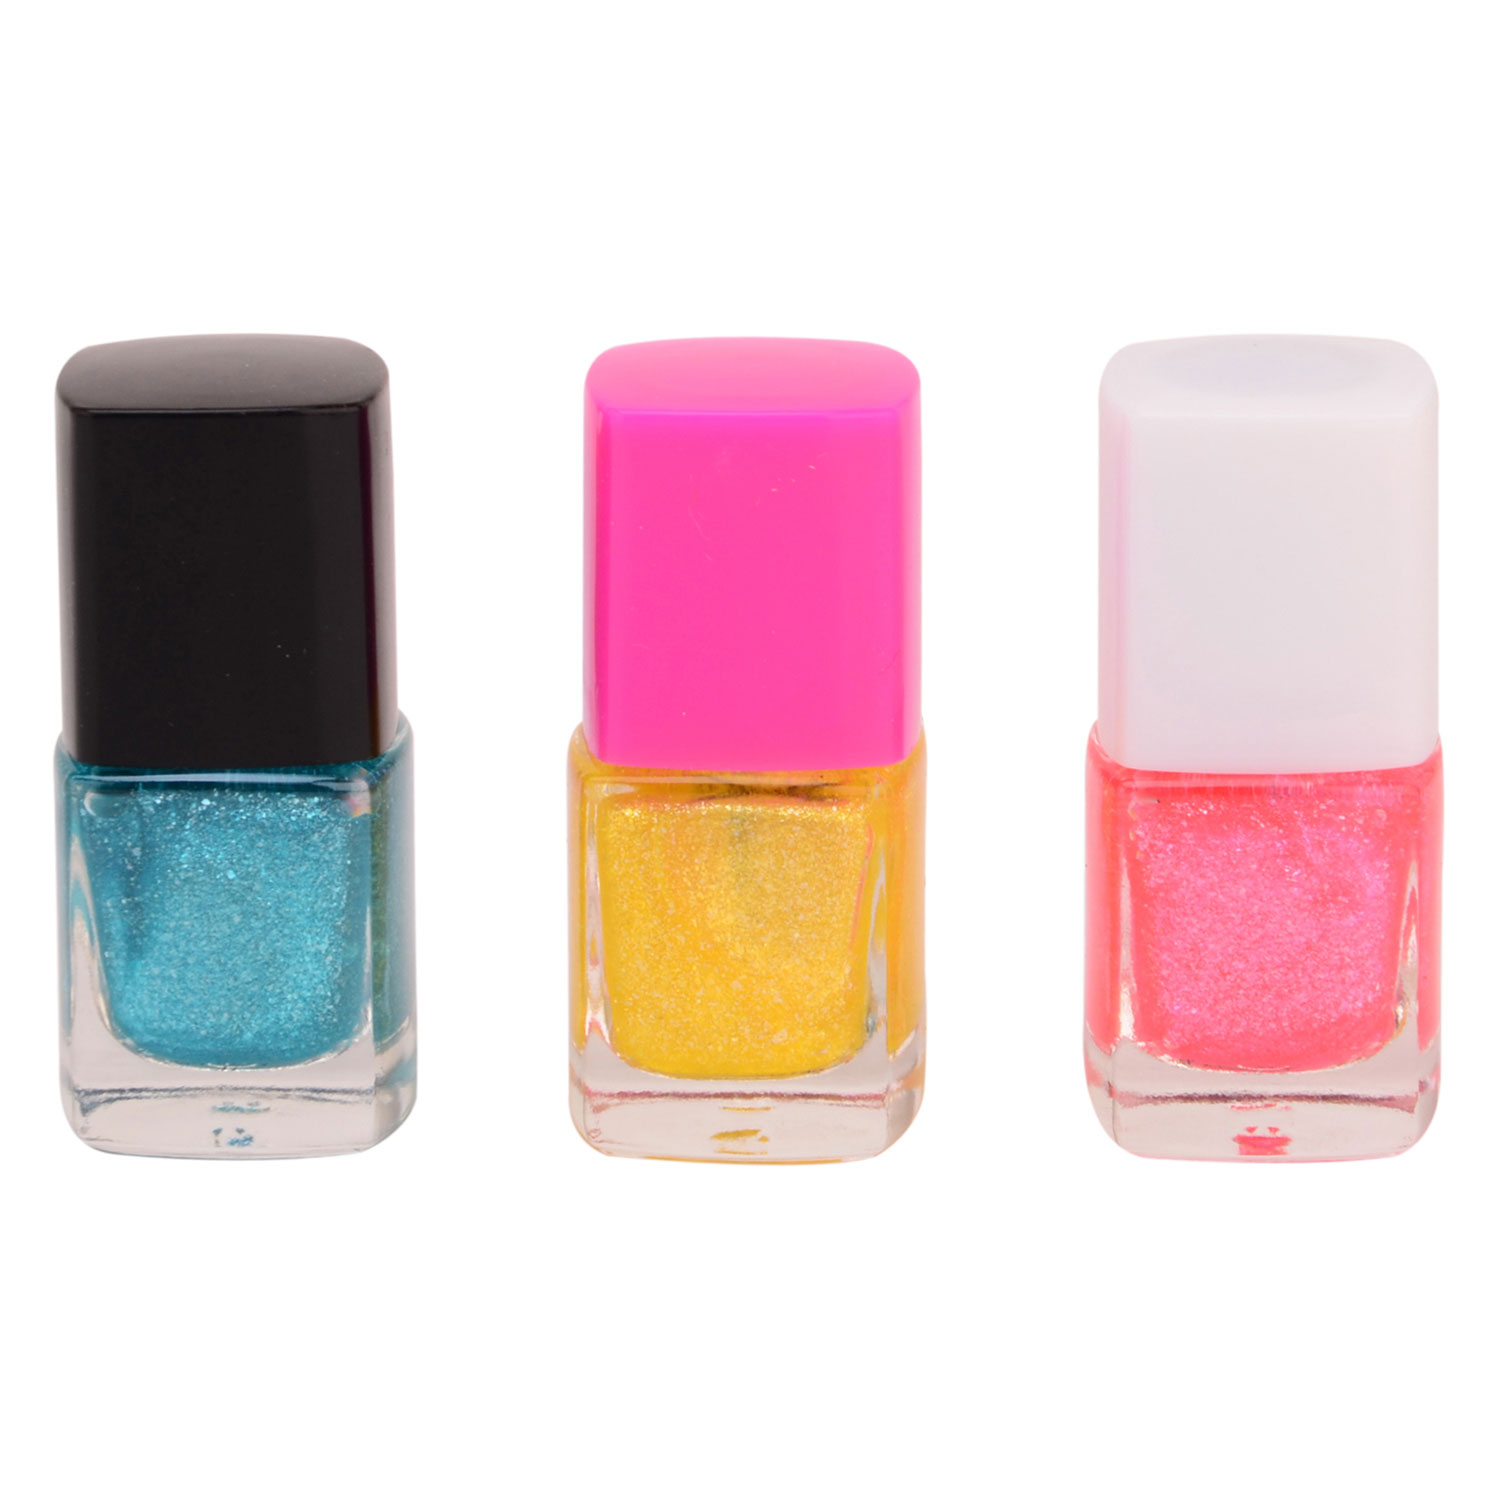 Share more than 159 nail polish carry on luggage latest ...